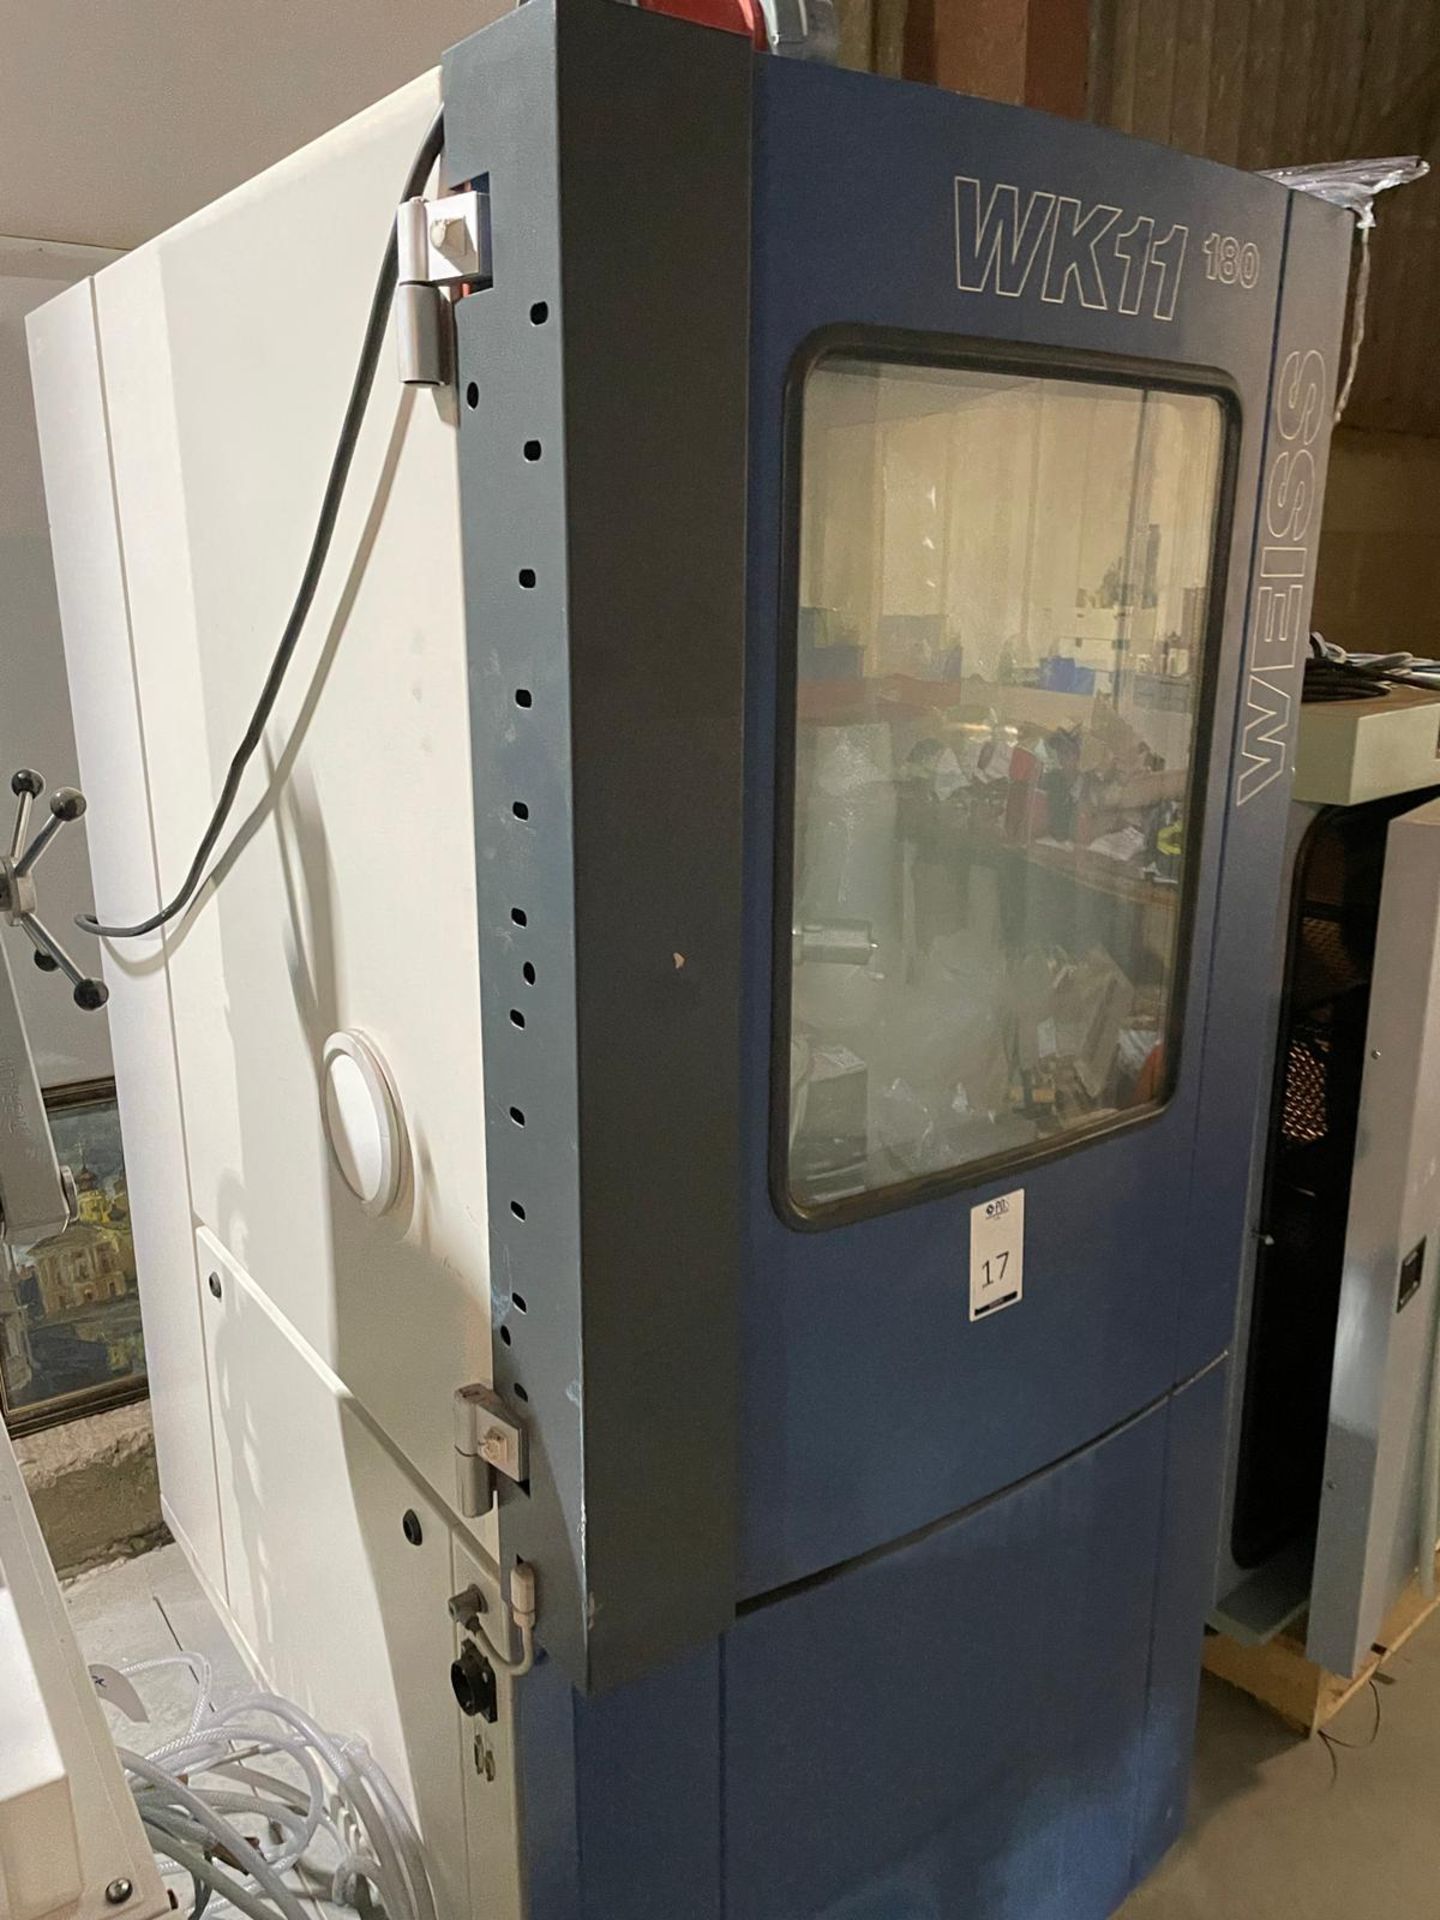 Weiss WK11 180 Environmental Test Chamber (2003), Serial number 58226037750010, Weiss WK11 – 180/40 - Image 4 of 13